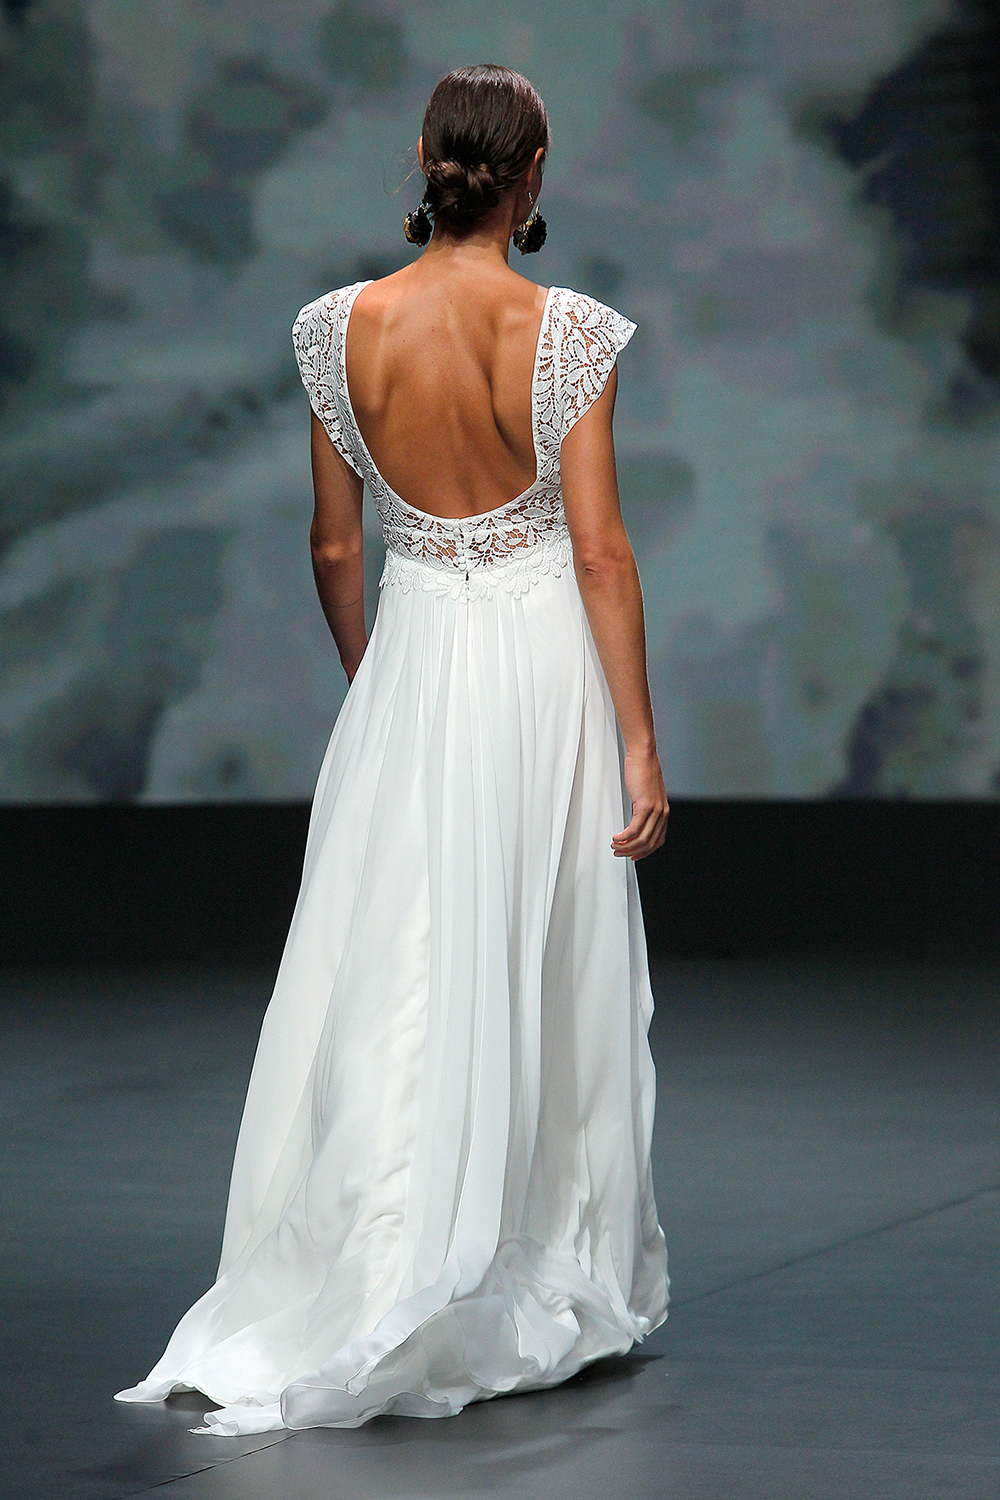  Rembo Styling 2021 | Créditos: Valmont Barcelona Bridal Fashion Week 2020